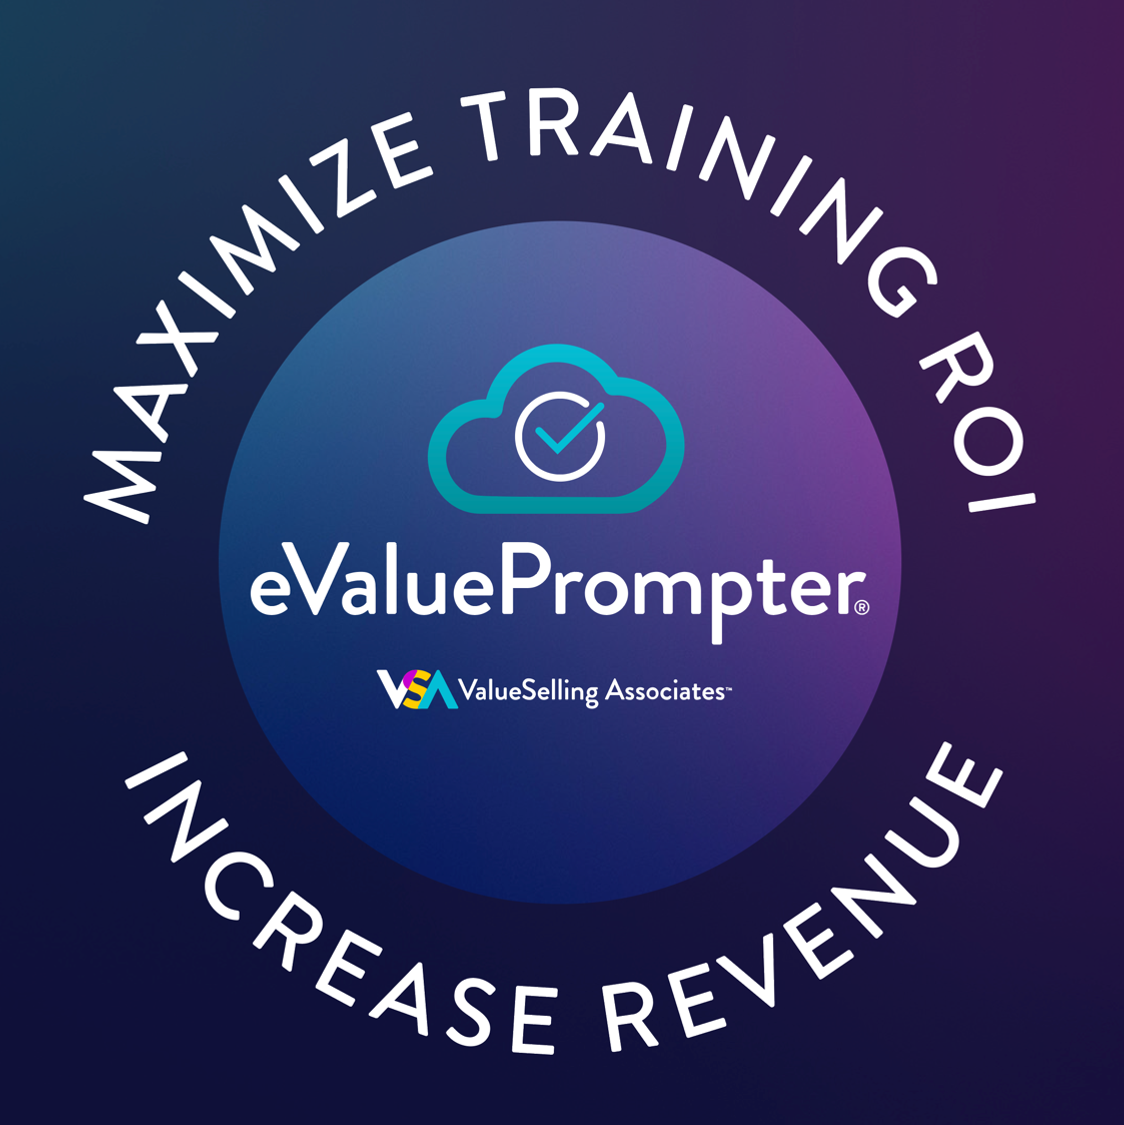 blue and purple image showing the eValuePrompter logo